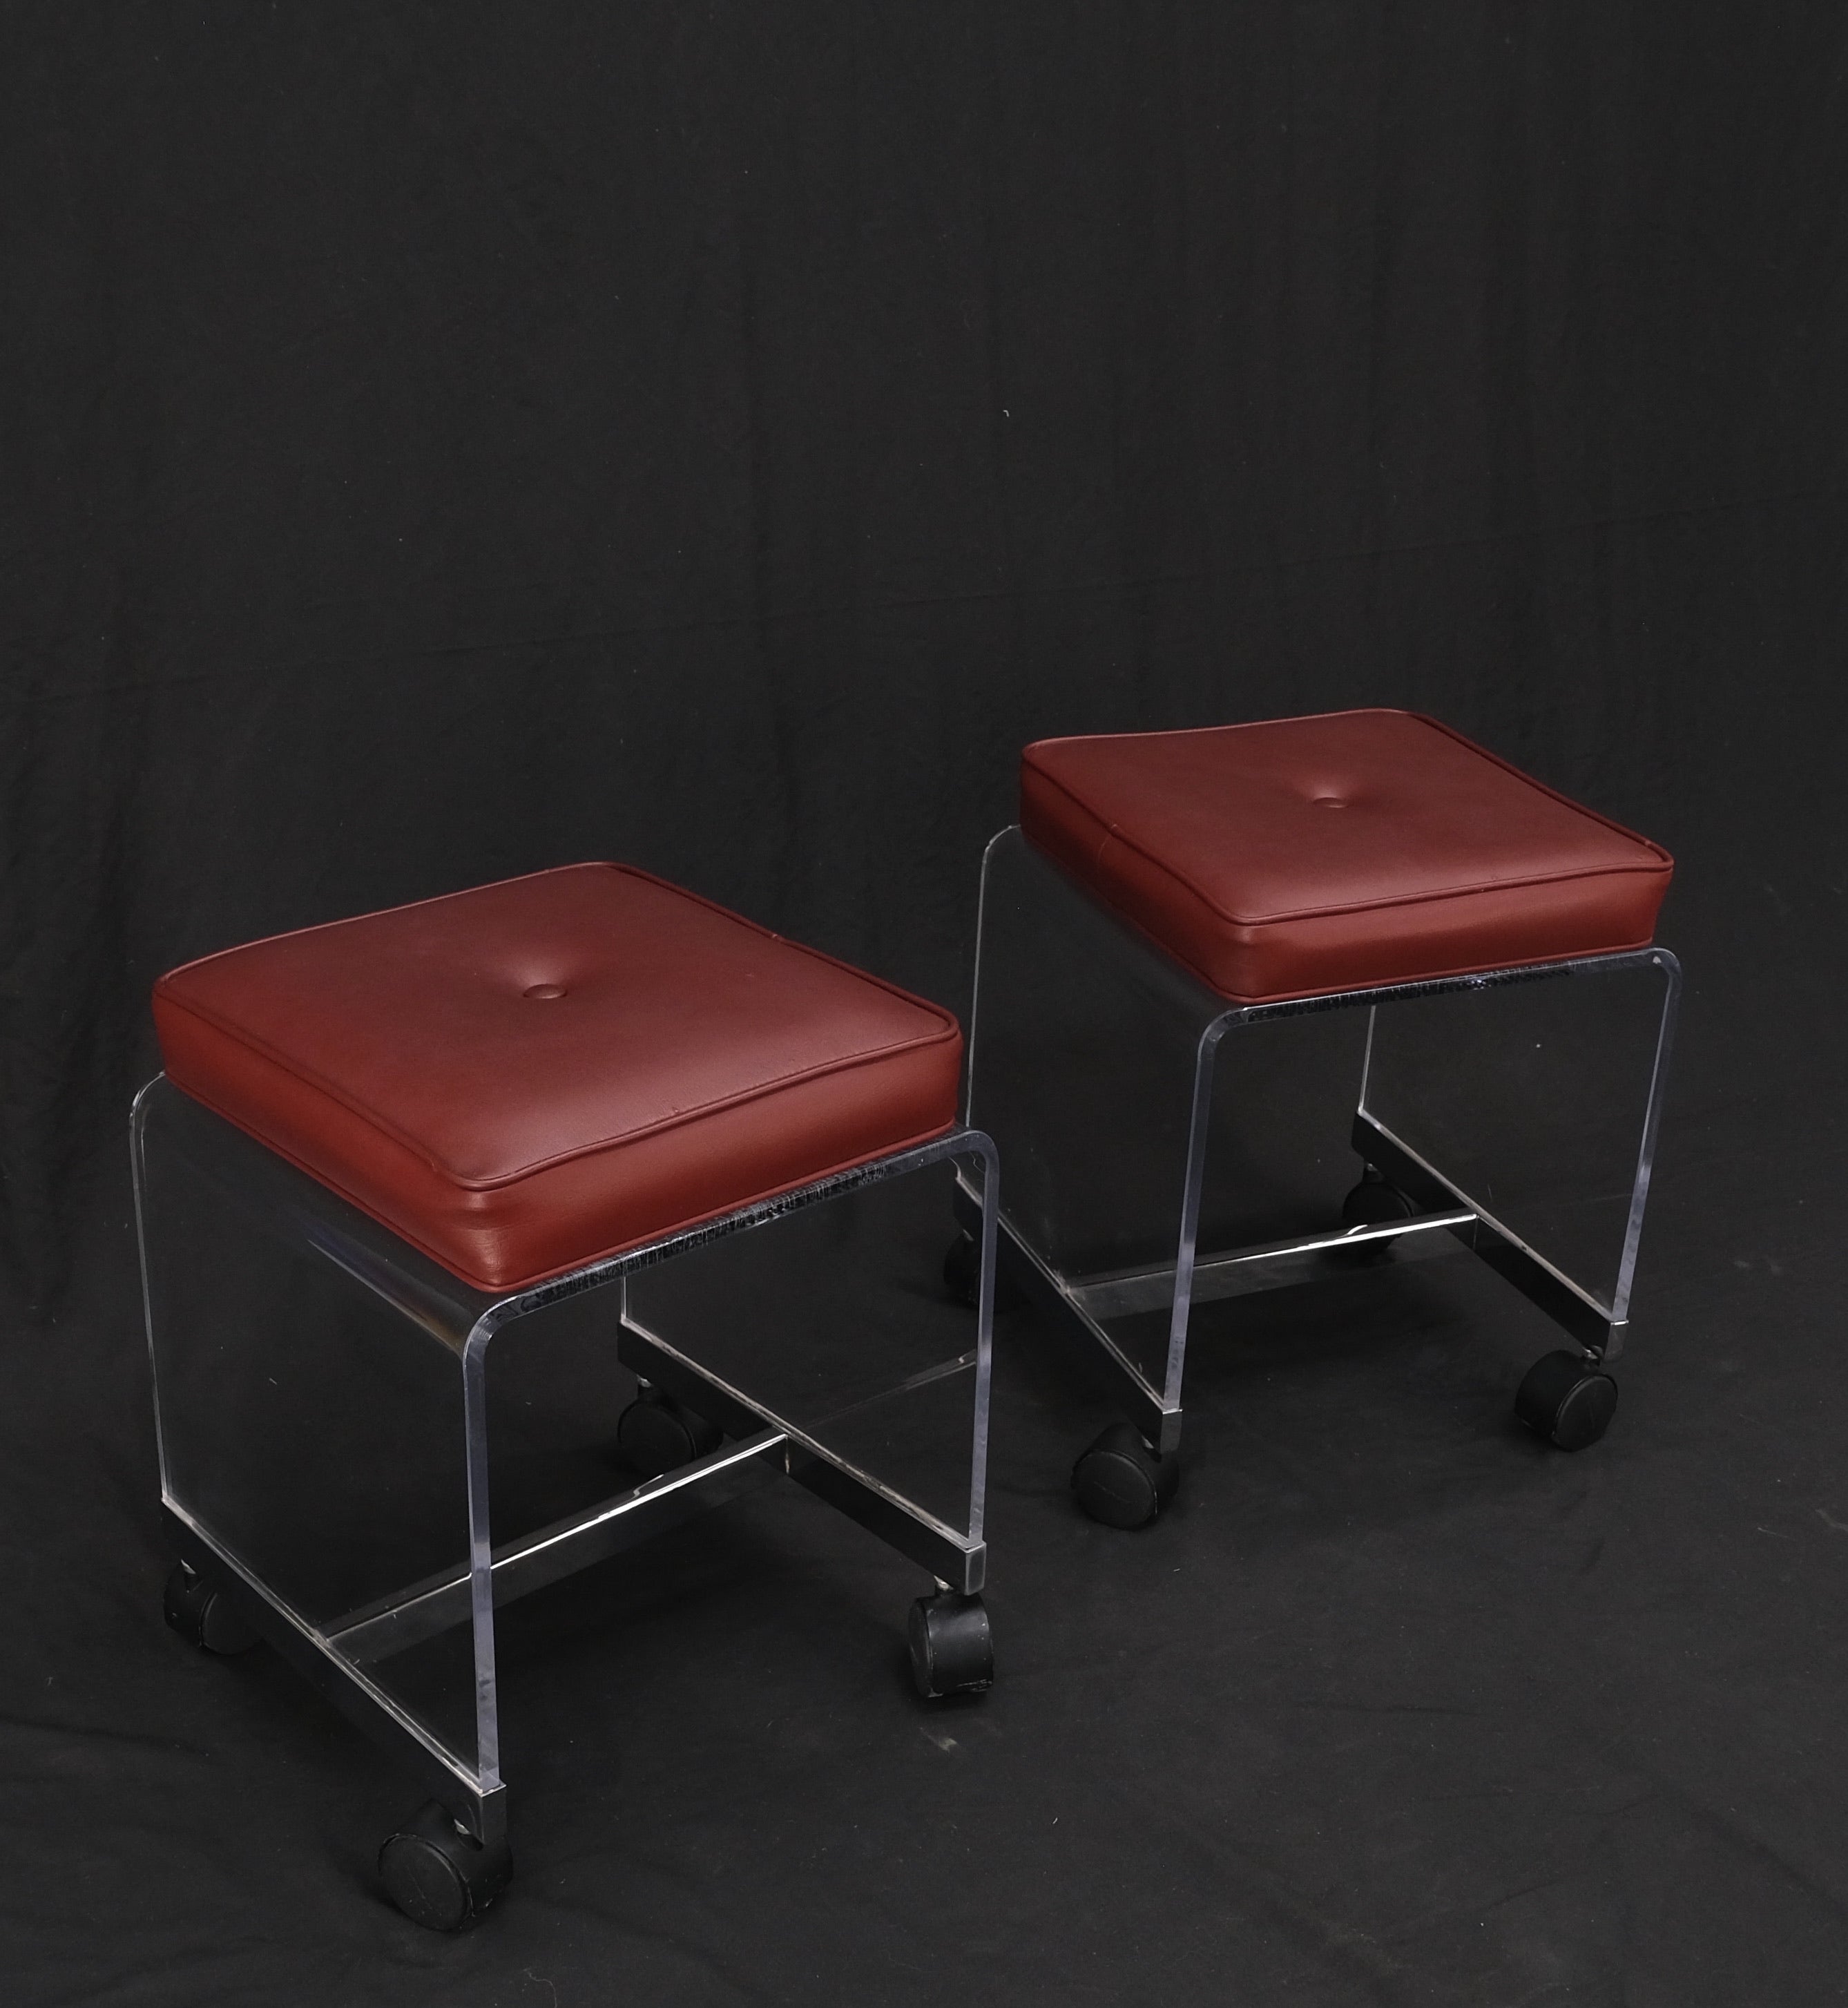 Pair of Mid-Century Modern Bent lucite Compact Benches on Wheels Clean!